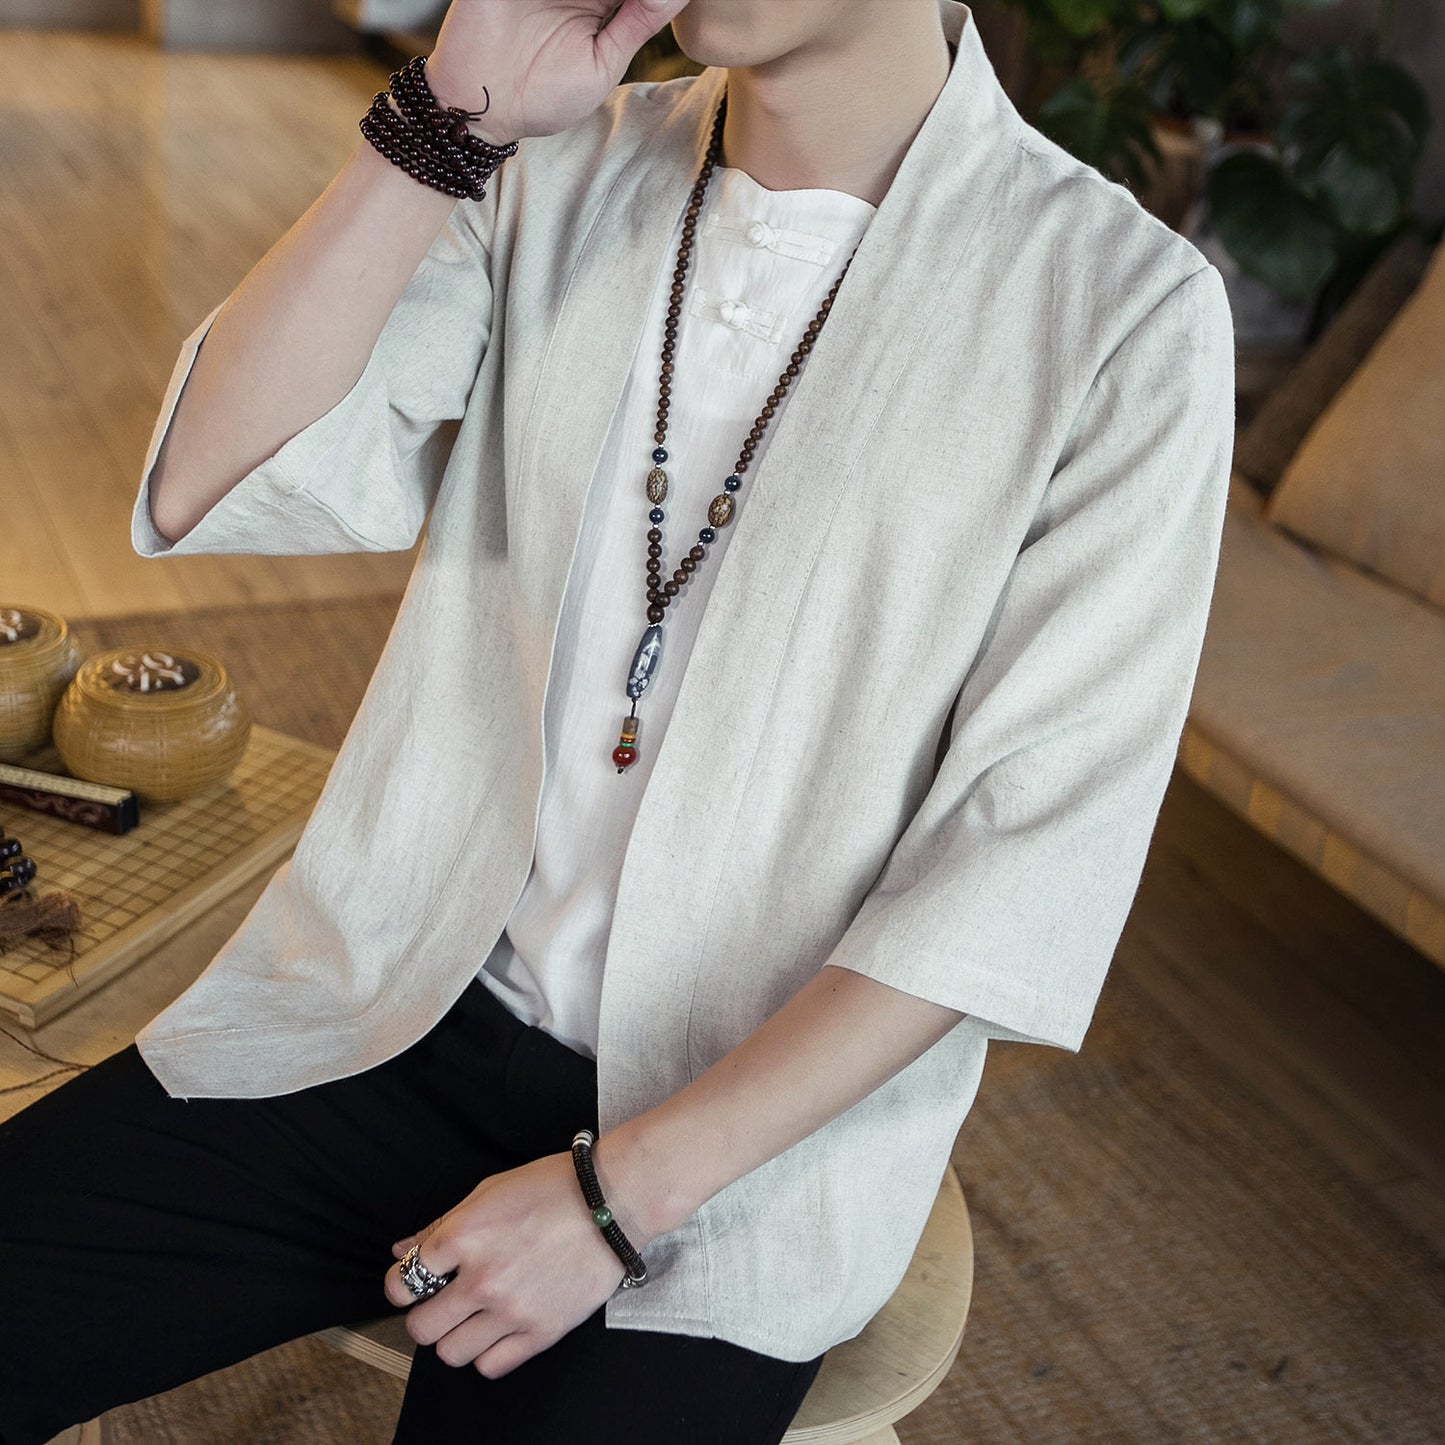 Summer men's Chinese style cotton and linen solid color Hanfu seven-point sleeve cardigan shirt men's fashion trend shirt